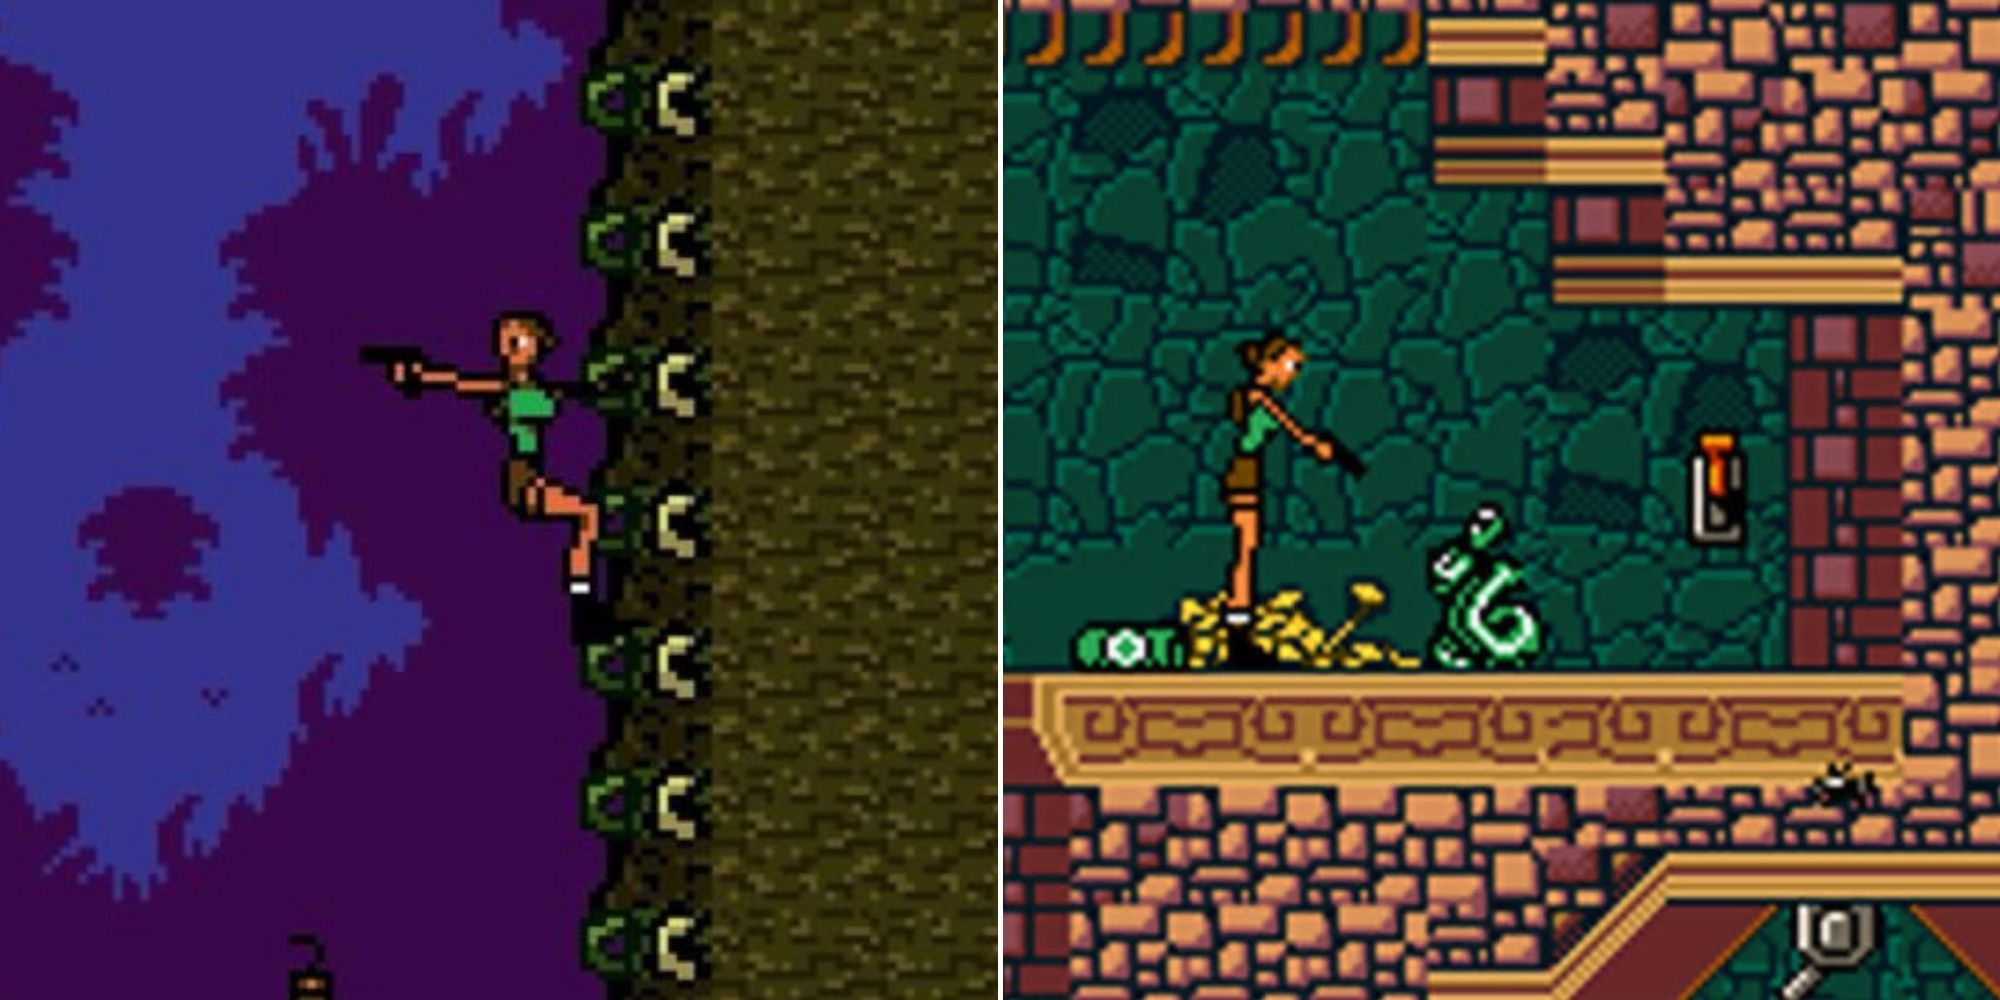 Lara climbing a cliff And Then exploring a tomb full of snakes in the Game Boy Color version of Tomb Raider (2000)